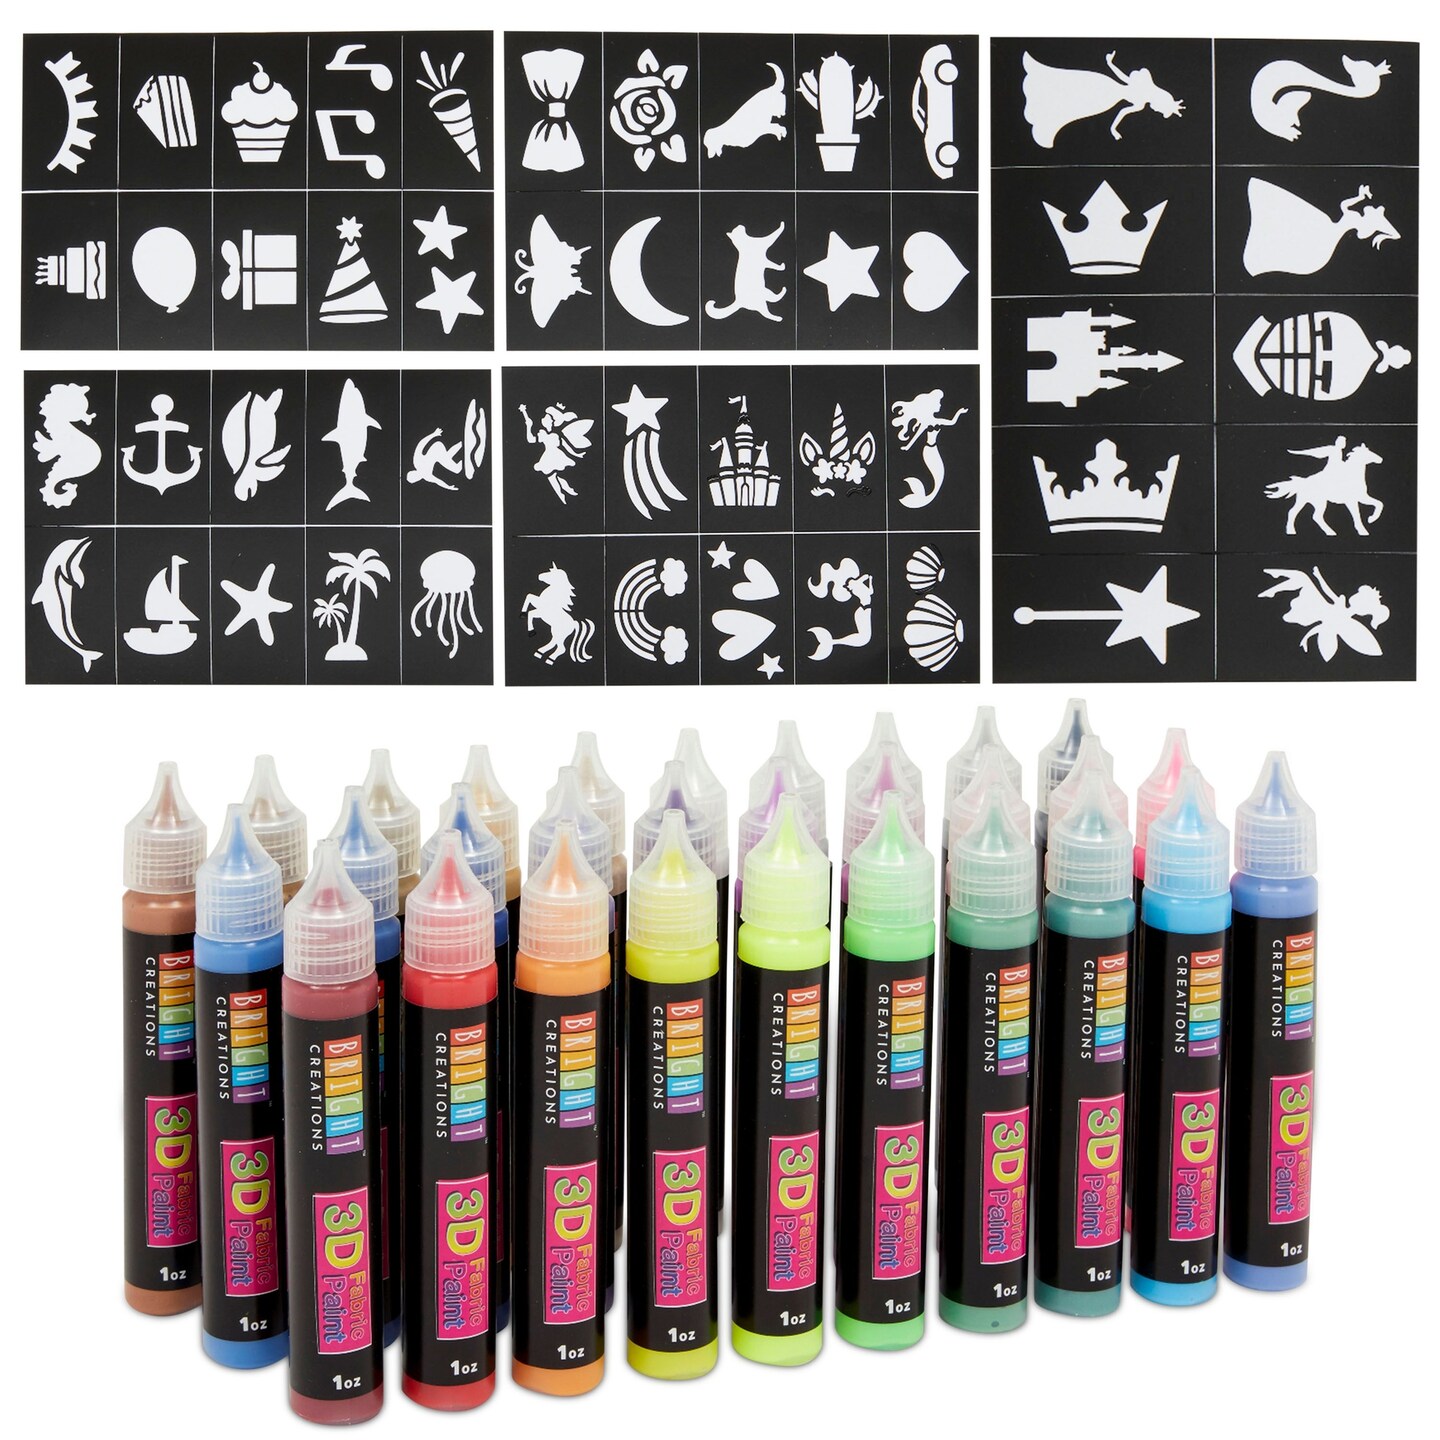 3D Fabric Paint 30 Colors with Sticker Stencils, Permanent Textile Paint Includes Neon, Metallic, Glitter for Clothing, Size: 30 ml